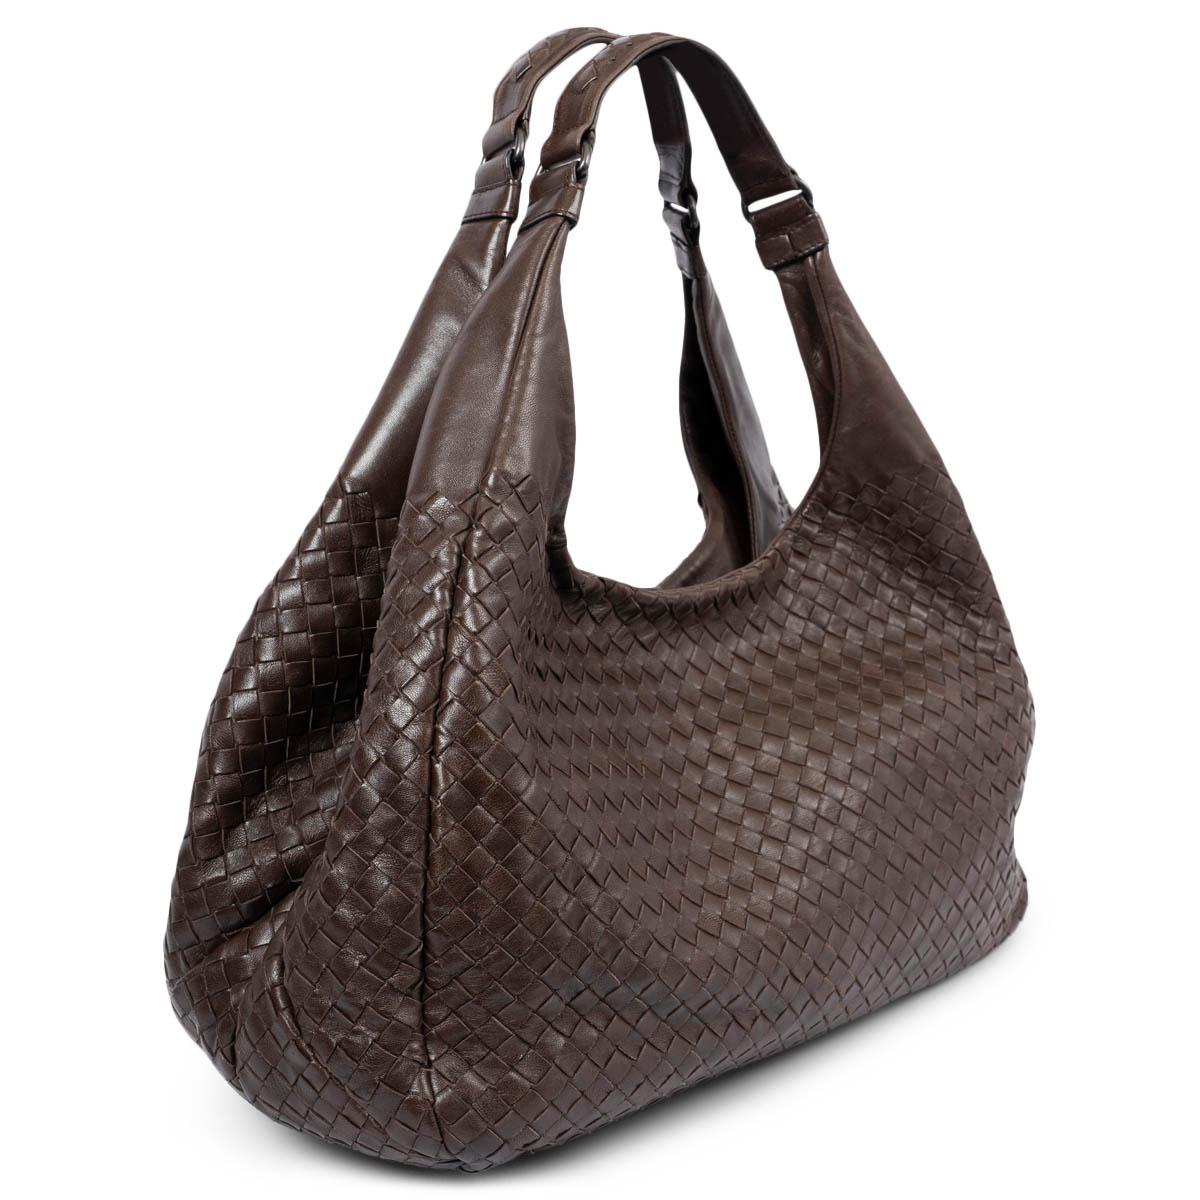 100% authentic Bottega Veneta Large Campana hobo in chocolate brown intrecciato leather. Closes with a dog-hook on strap on top. Lined in beige suede with an open pocket against the front and zipper pocket against the back. Has been carried and is